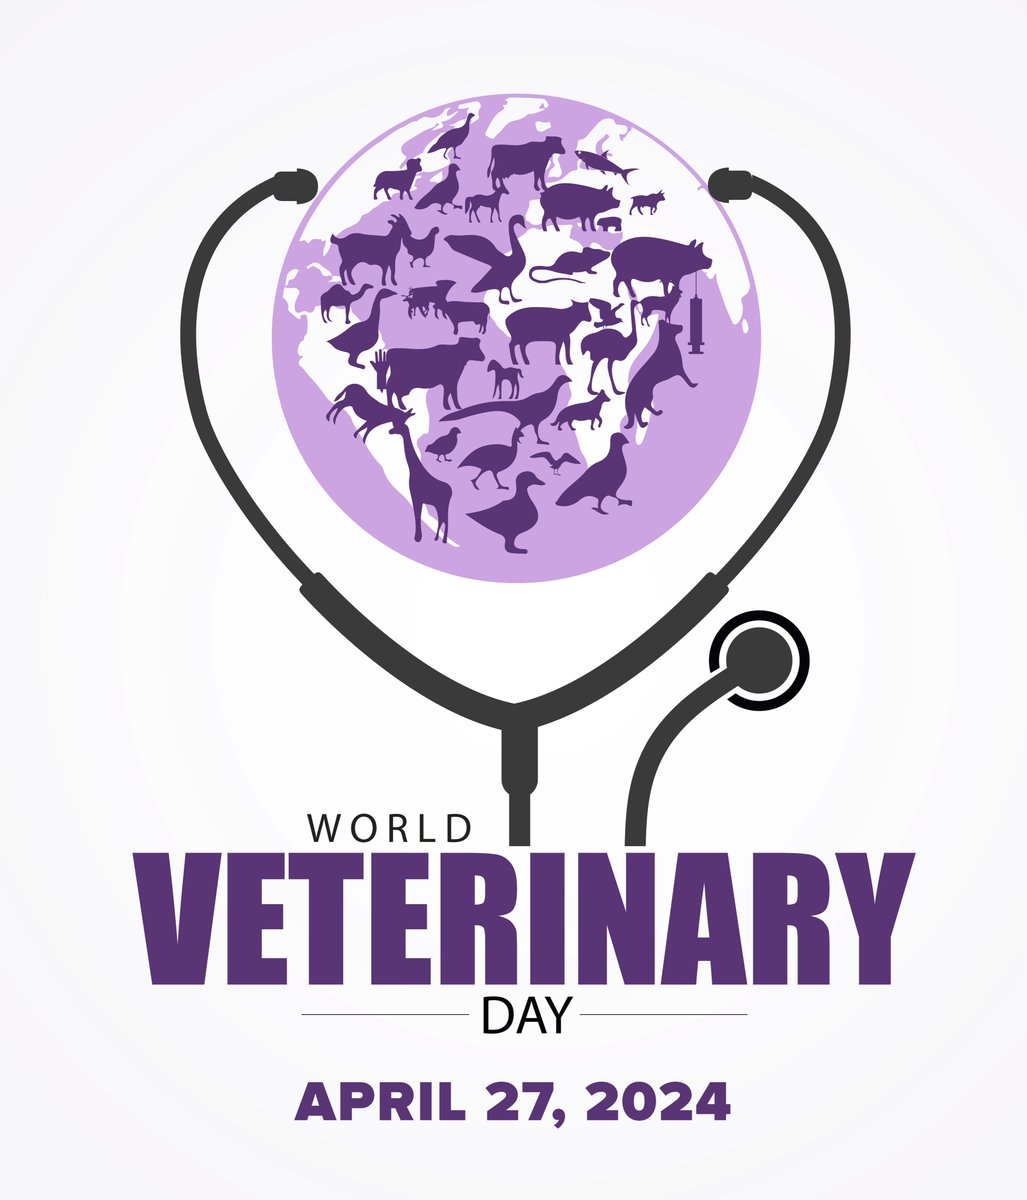 Veterinarians are heroes. On this #WorldVeterinaryDay2024 we honor the invaluable contributions to animal health, welfare, and conservation that veterinarians provide, today and everyday. Thank you for your unwavering commitment and endless compassion! You make our world better!